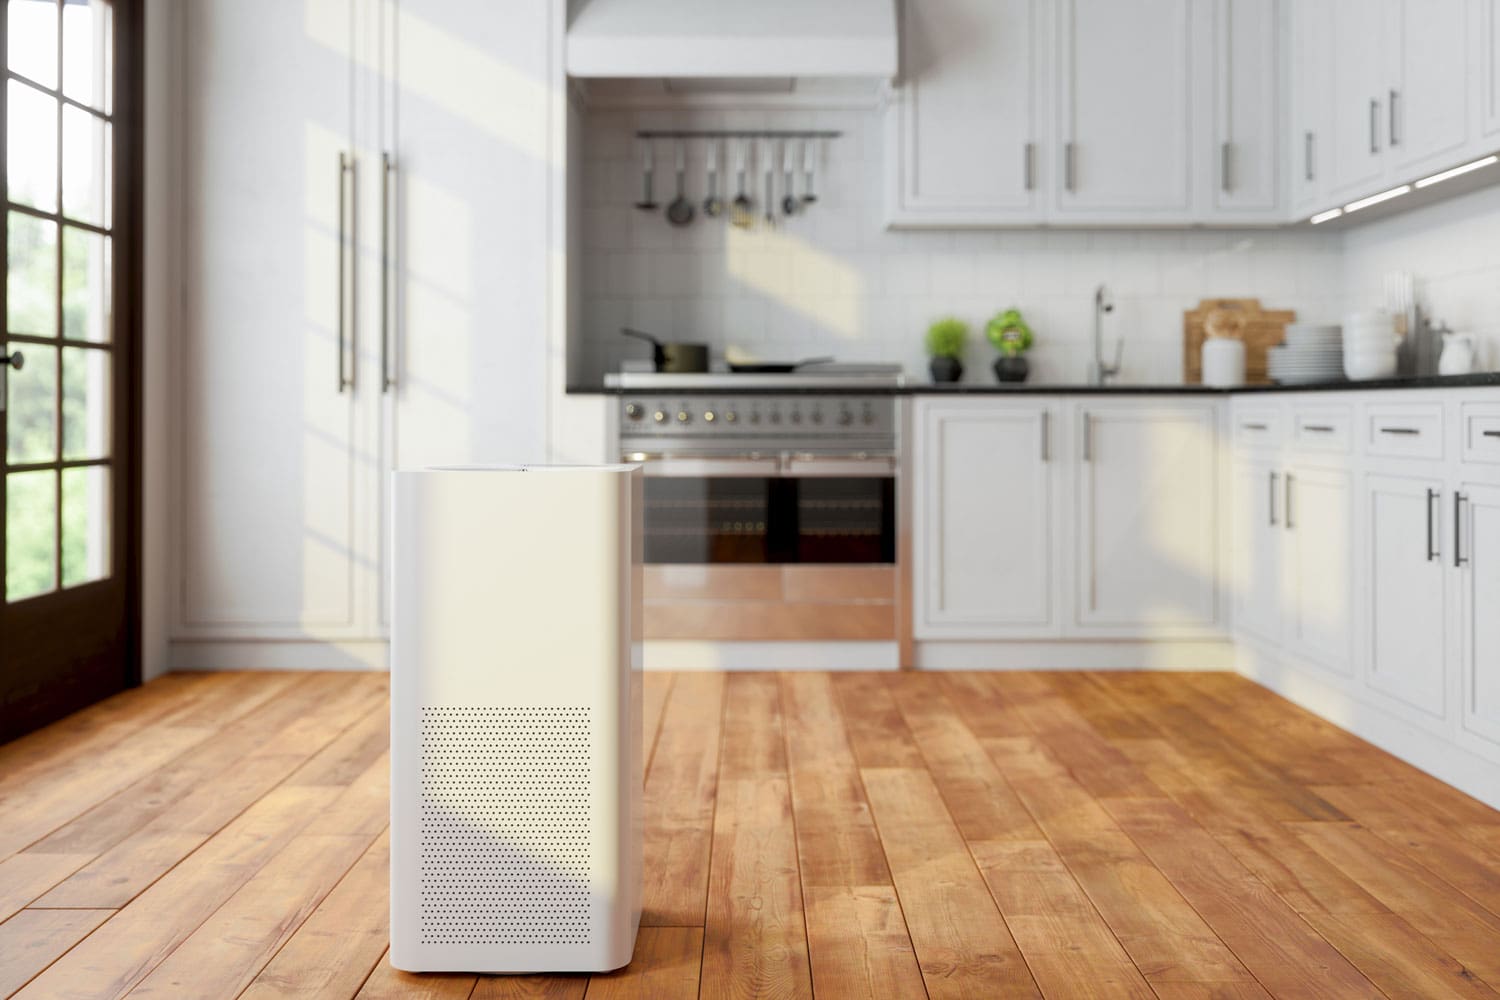 Air Purifier In Modern Kitchen For Fresh Air, Healthy Life, Cleaning And Removing Dust.